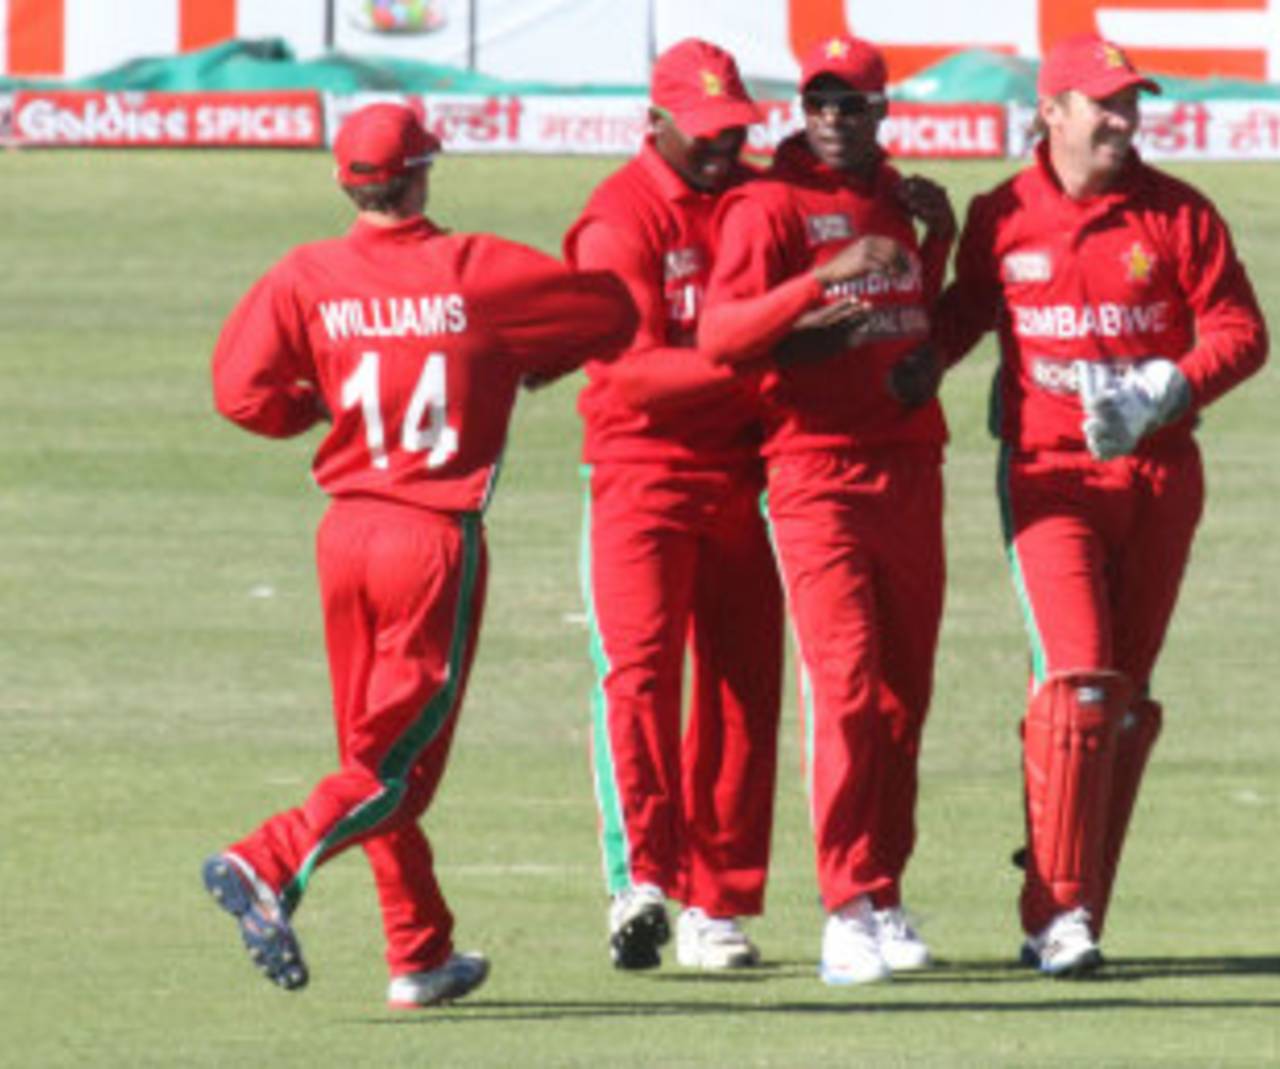 The more insidious problem is not the amount that Zimbabwe's cricketers are paid - it is how much they are valued by their own board&nbsp;&nbsp;&bull;&nbsp;&nbsp;Associated Press